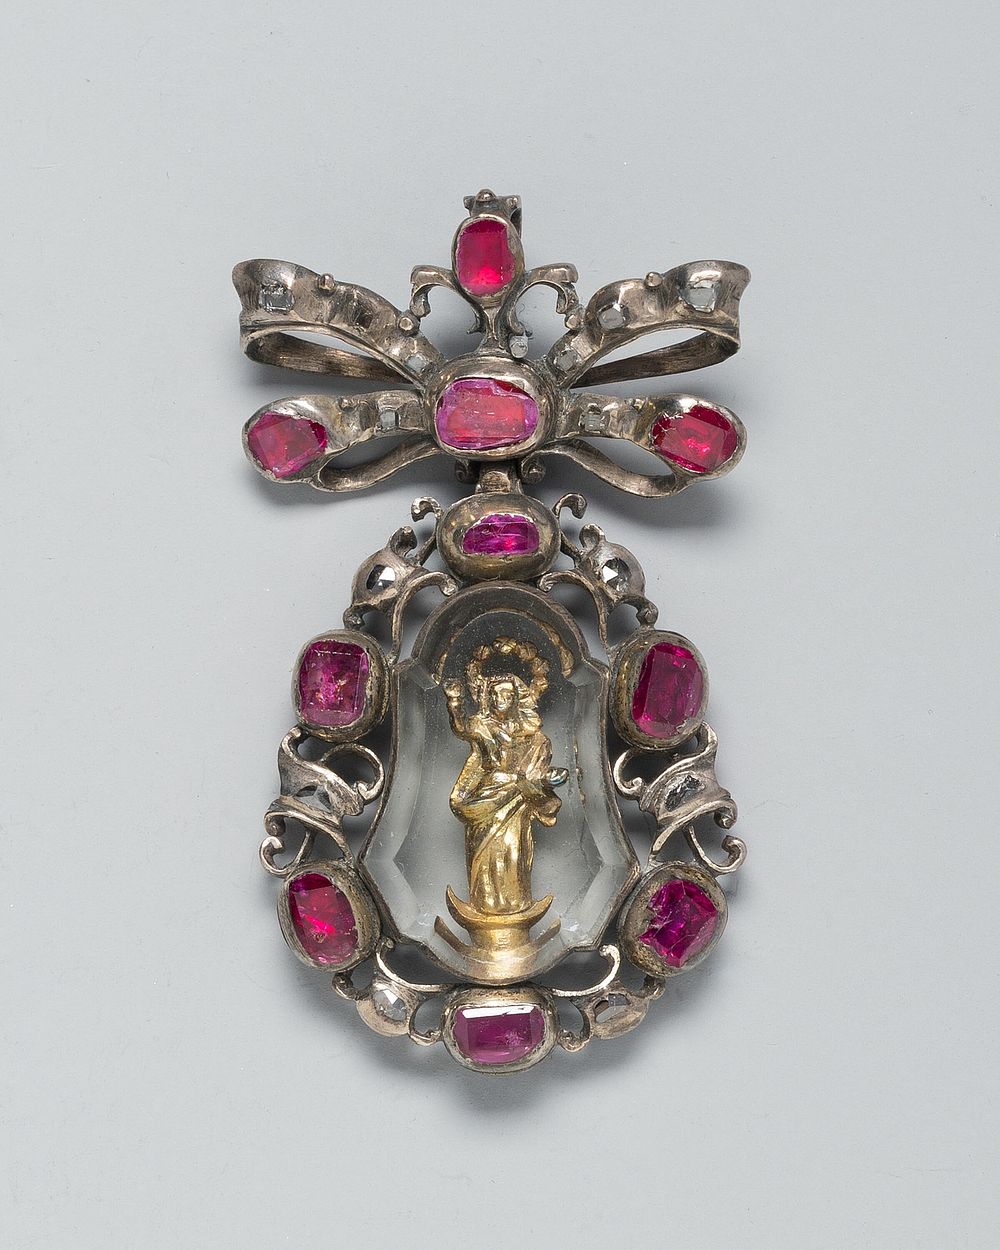 Pendant with the Virgin